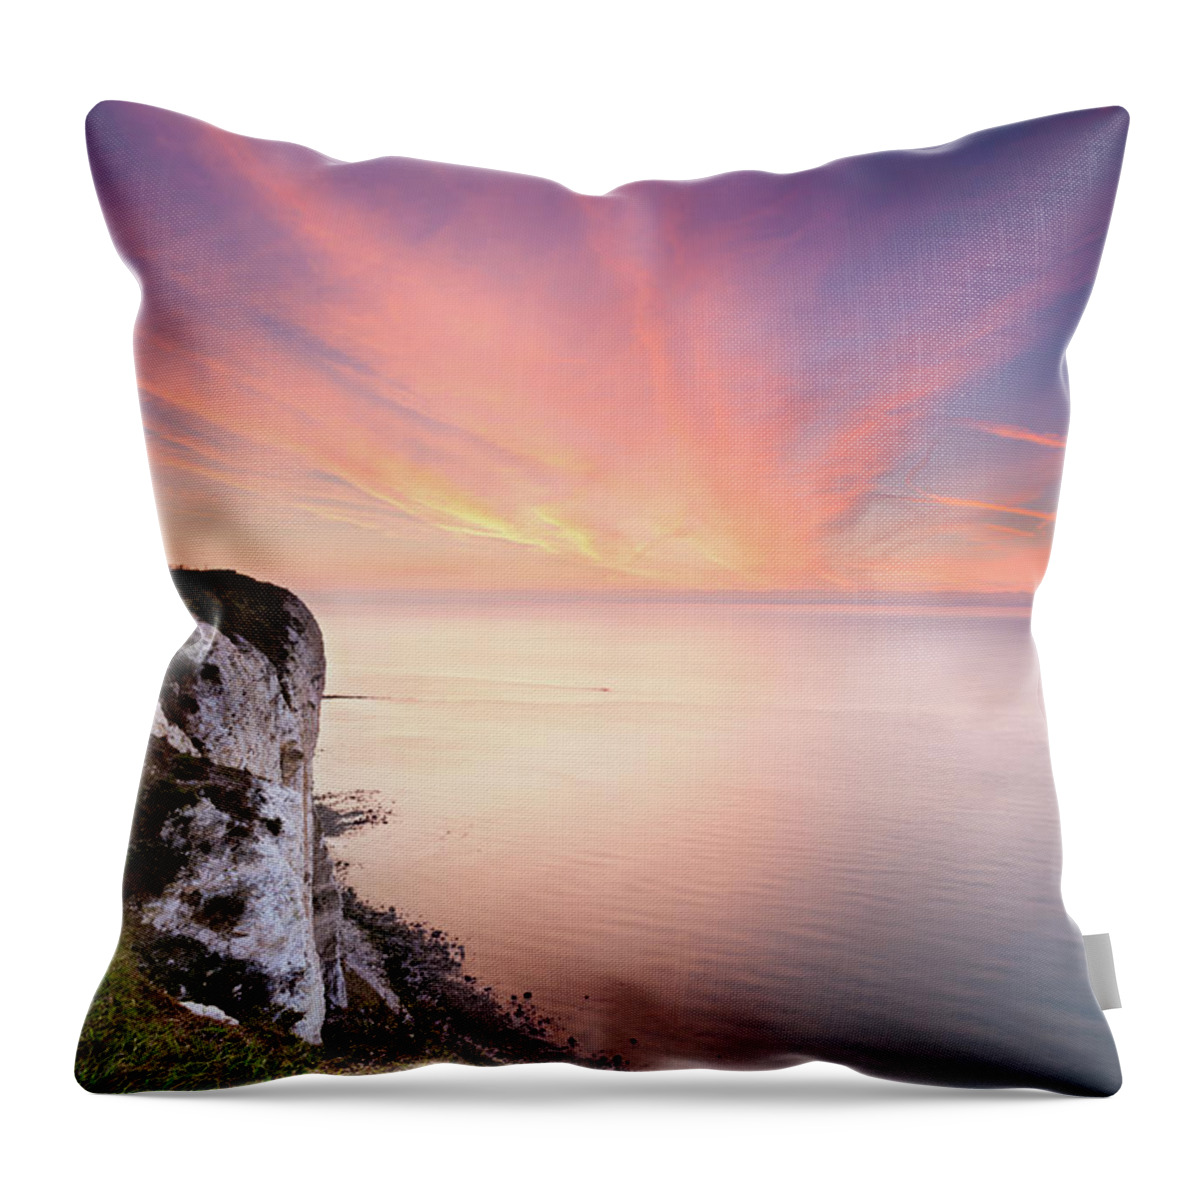 Scenics Throw Pillow featuring the photograph Colorful Sunrise At Beachy Head by Andrea Ricordi, Italy